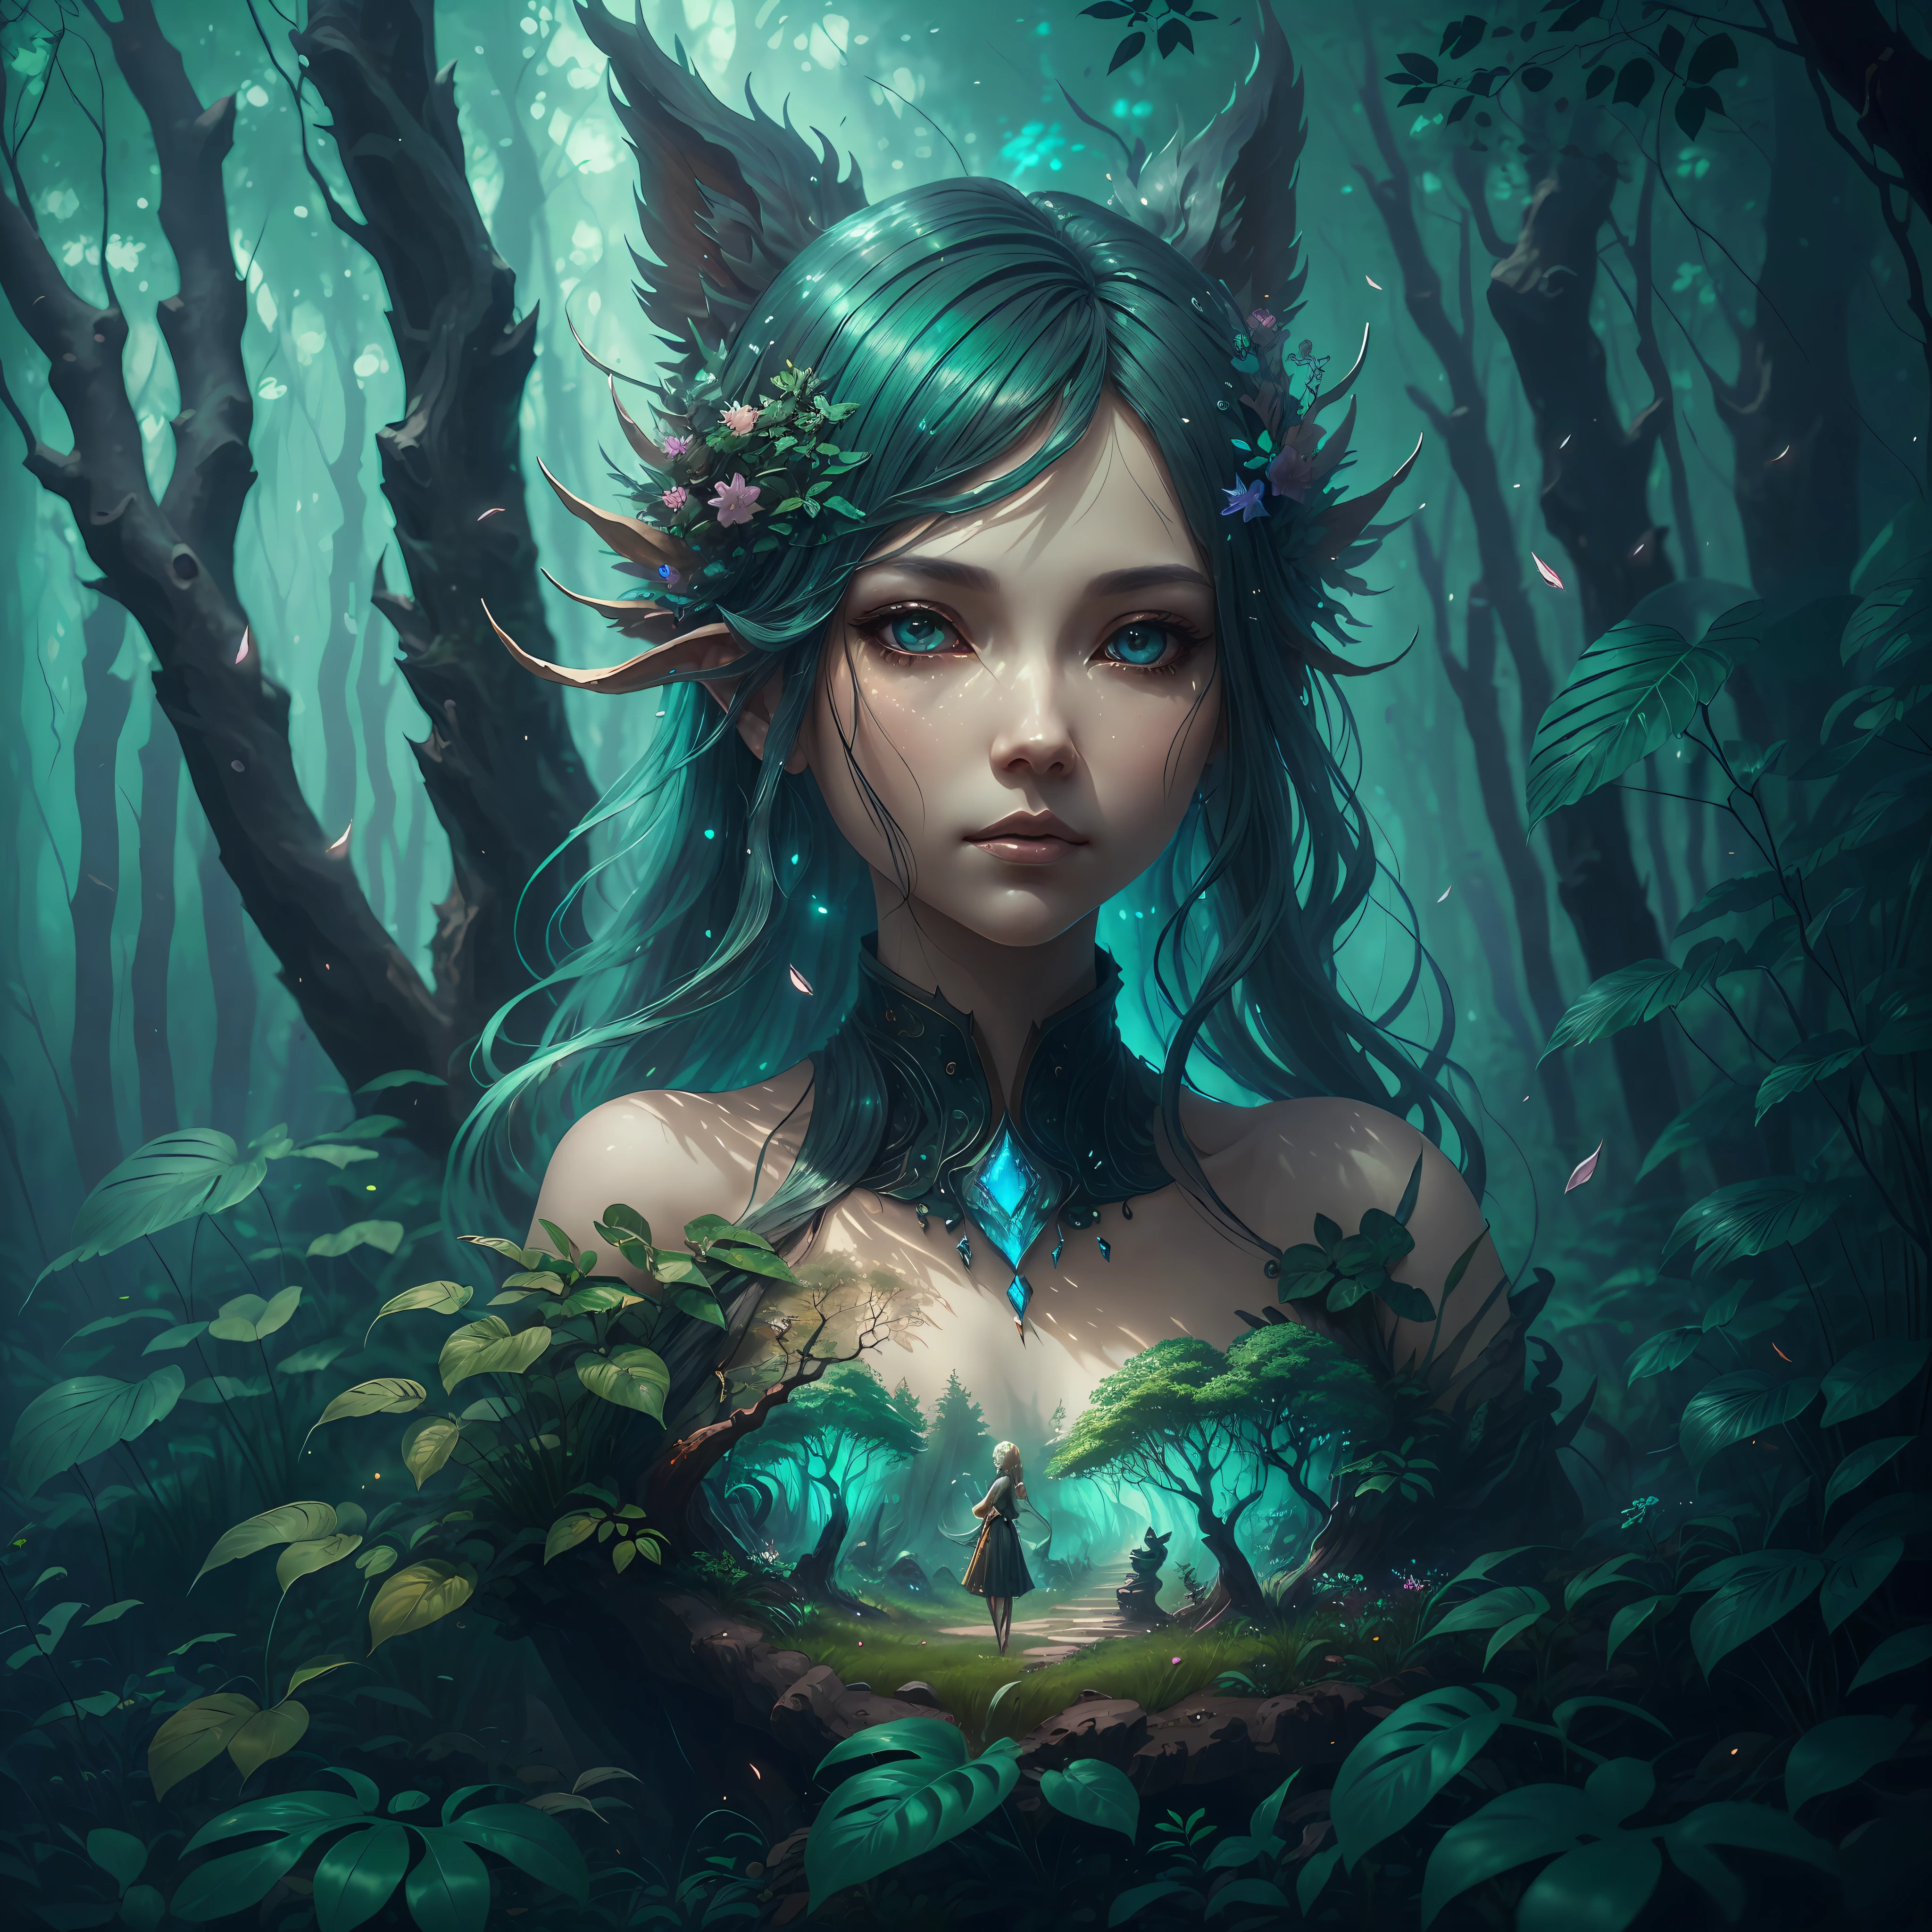 generate a  female forest spirit ((created in the style of Ruan Jia artstation)). The woman should have a beautifully detailed face and eyes with realistic shading. She should be in an enchanting, whimsical, and lush vegetation (created in the style of Hayao Miyazaki). include ethereal glow, mystical creatures, vibrant colors, dreamlike atmosphere, realism. wideshot showing landscape. include phantasmal iridescence and fantasy details